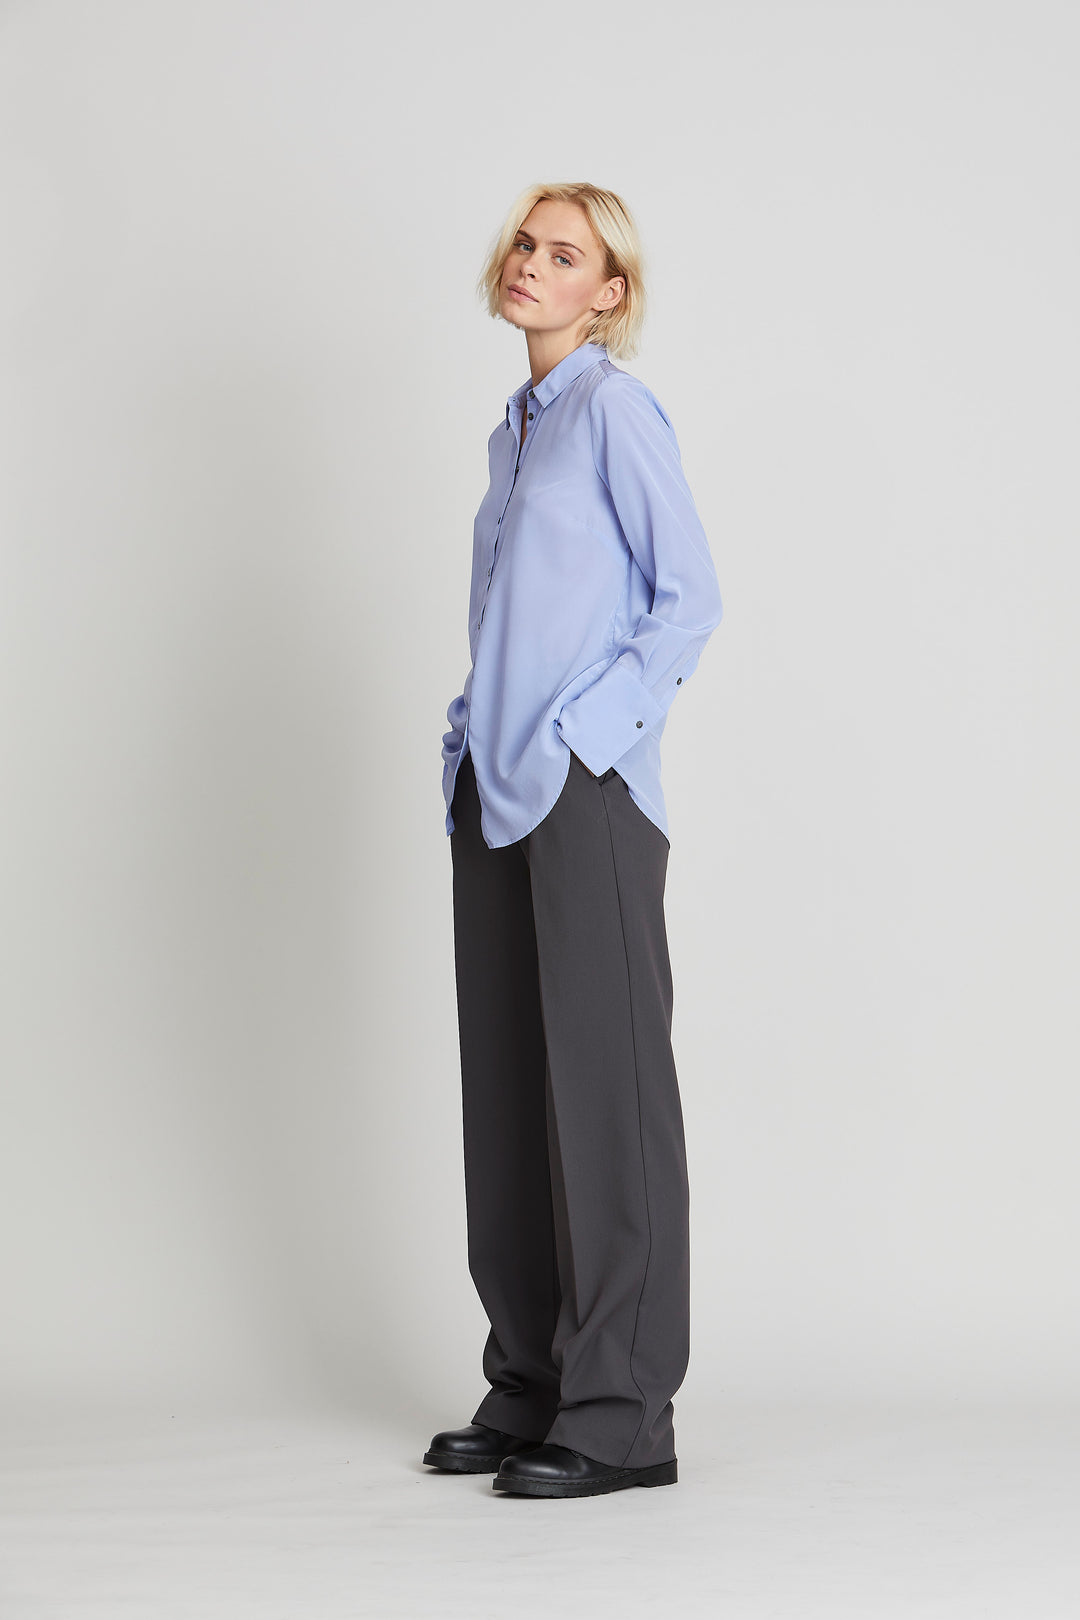 Heartmade Noma pants HM TROUSERS 19 Antrasit